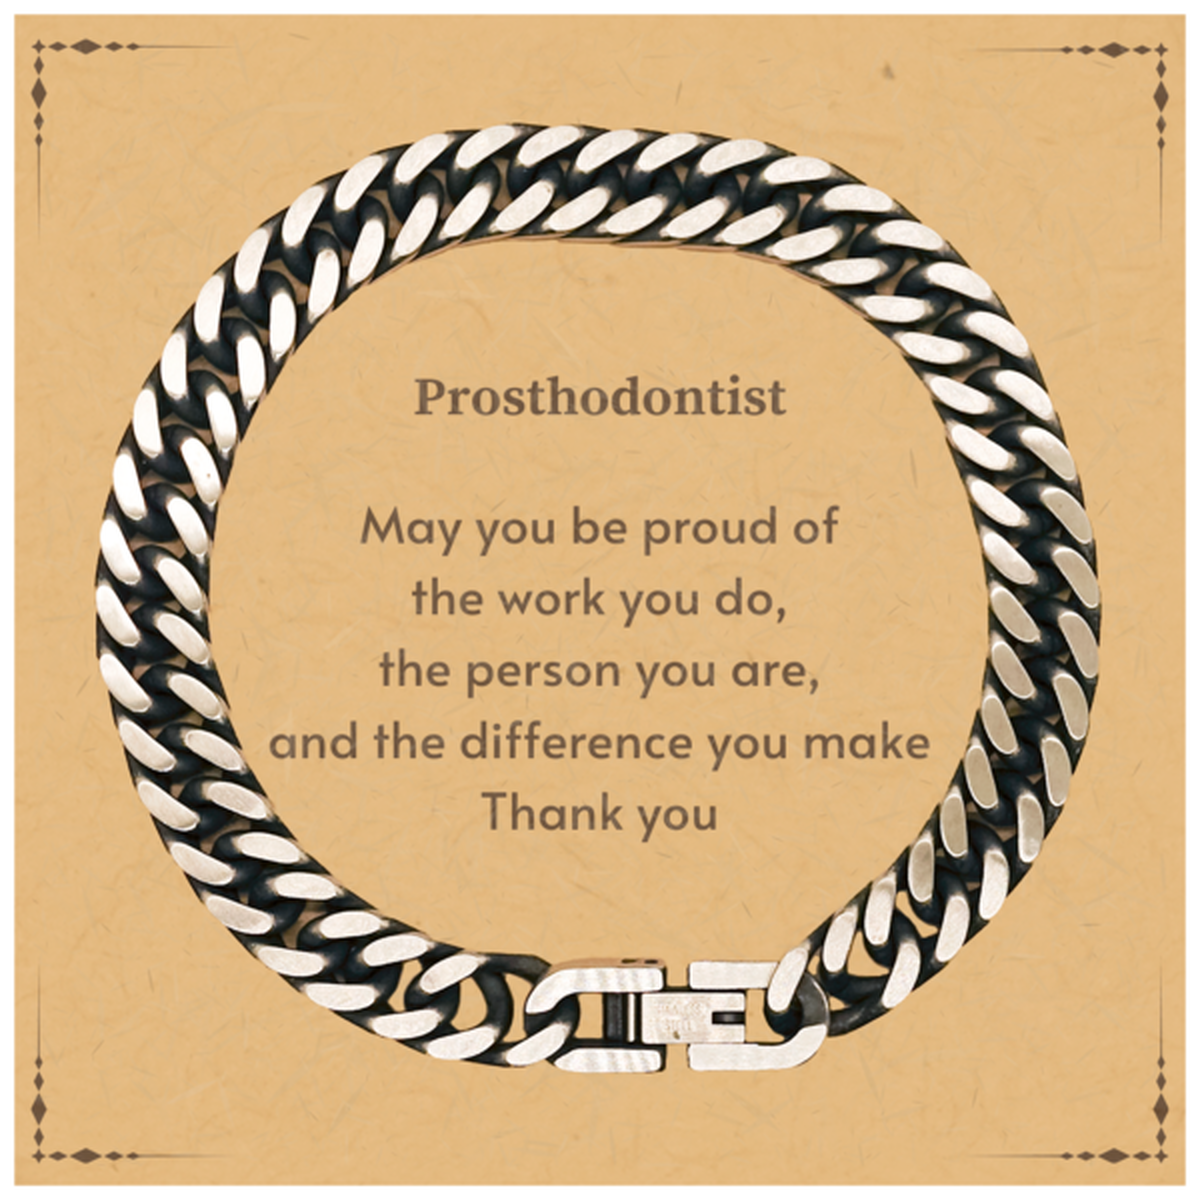 Heartwarming Cuban Link Chain Bracelet Retirement Coworkers Gifts for Prosthodontist, Prosthodontist May You be proud of the work you do, the person you are Gifts for Boss Men Women Friends